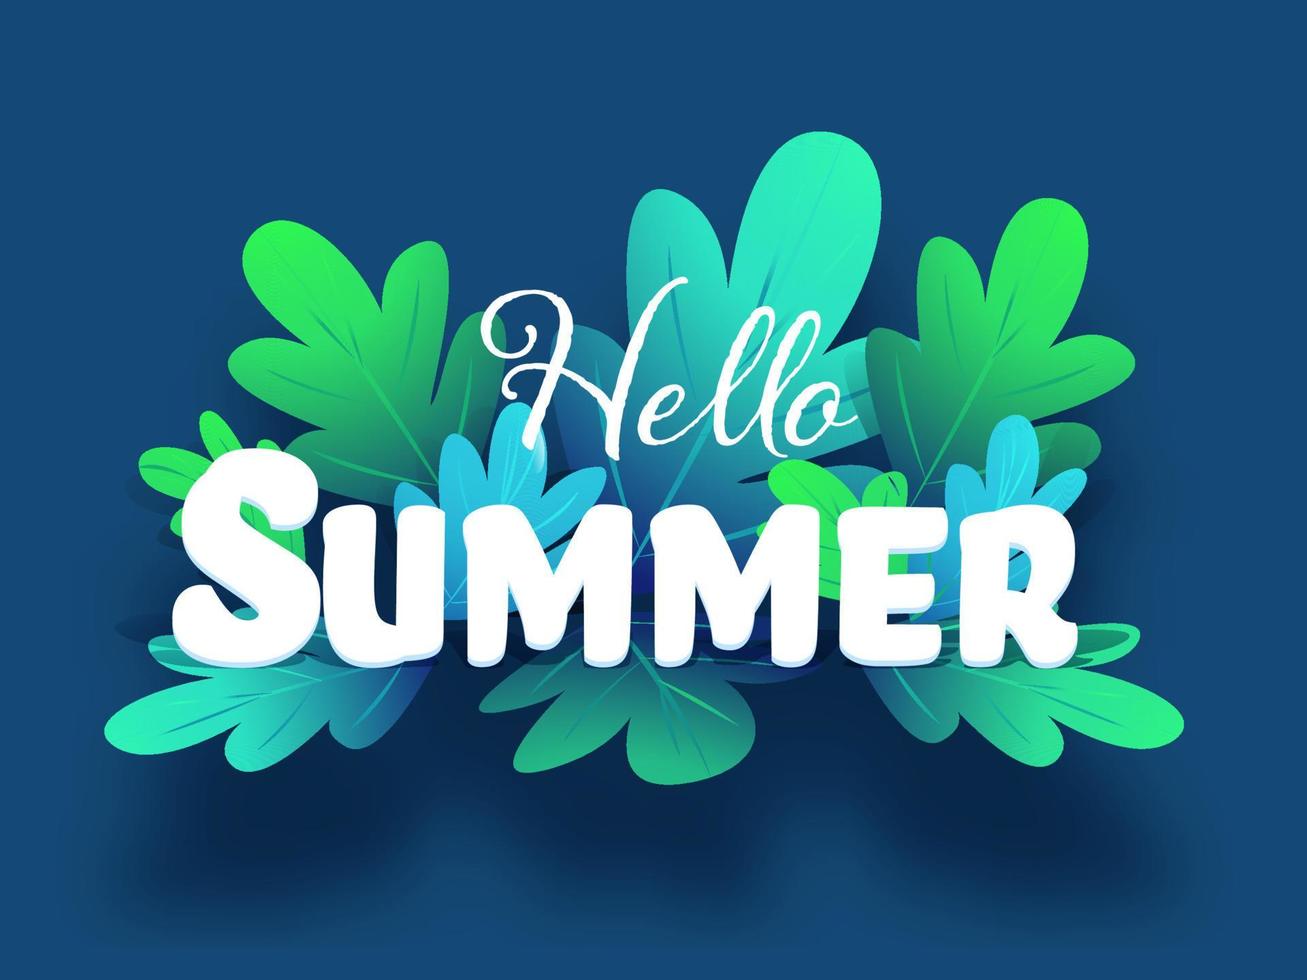 Hello Summer Font on Leaves Decorated Blue Background. vector